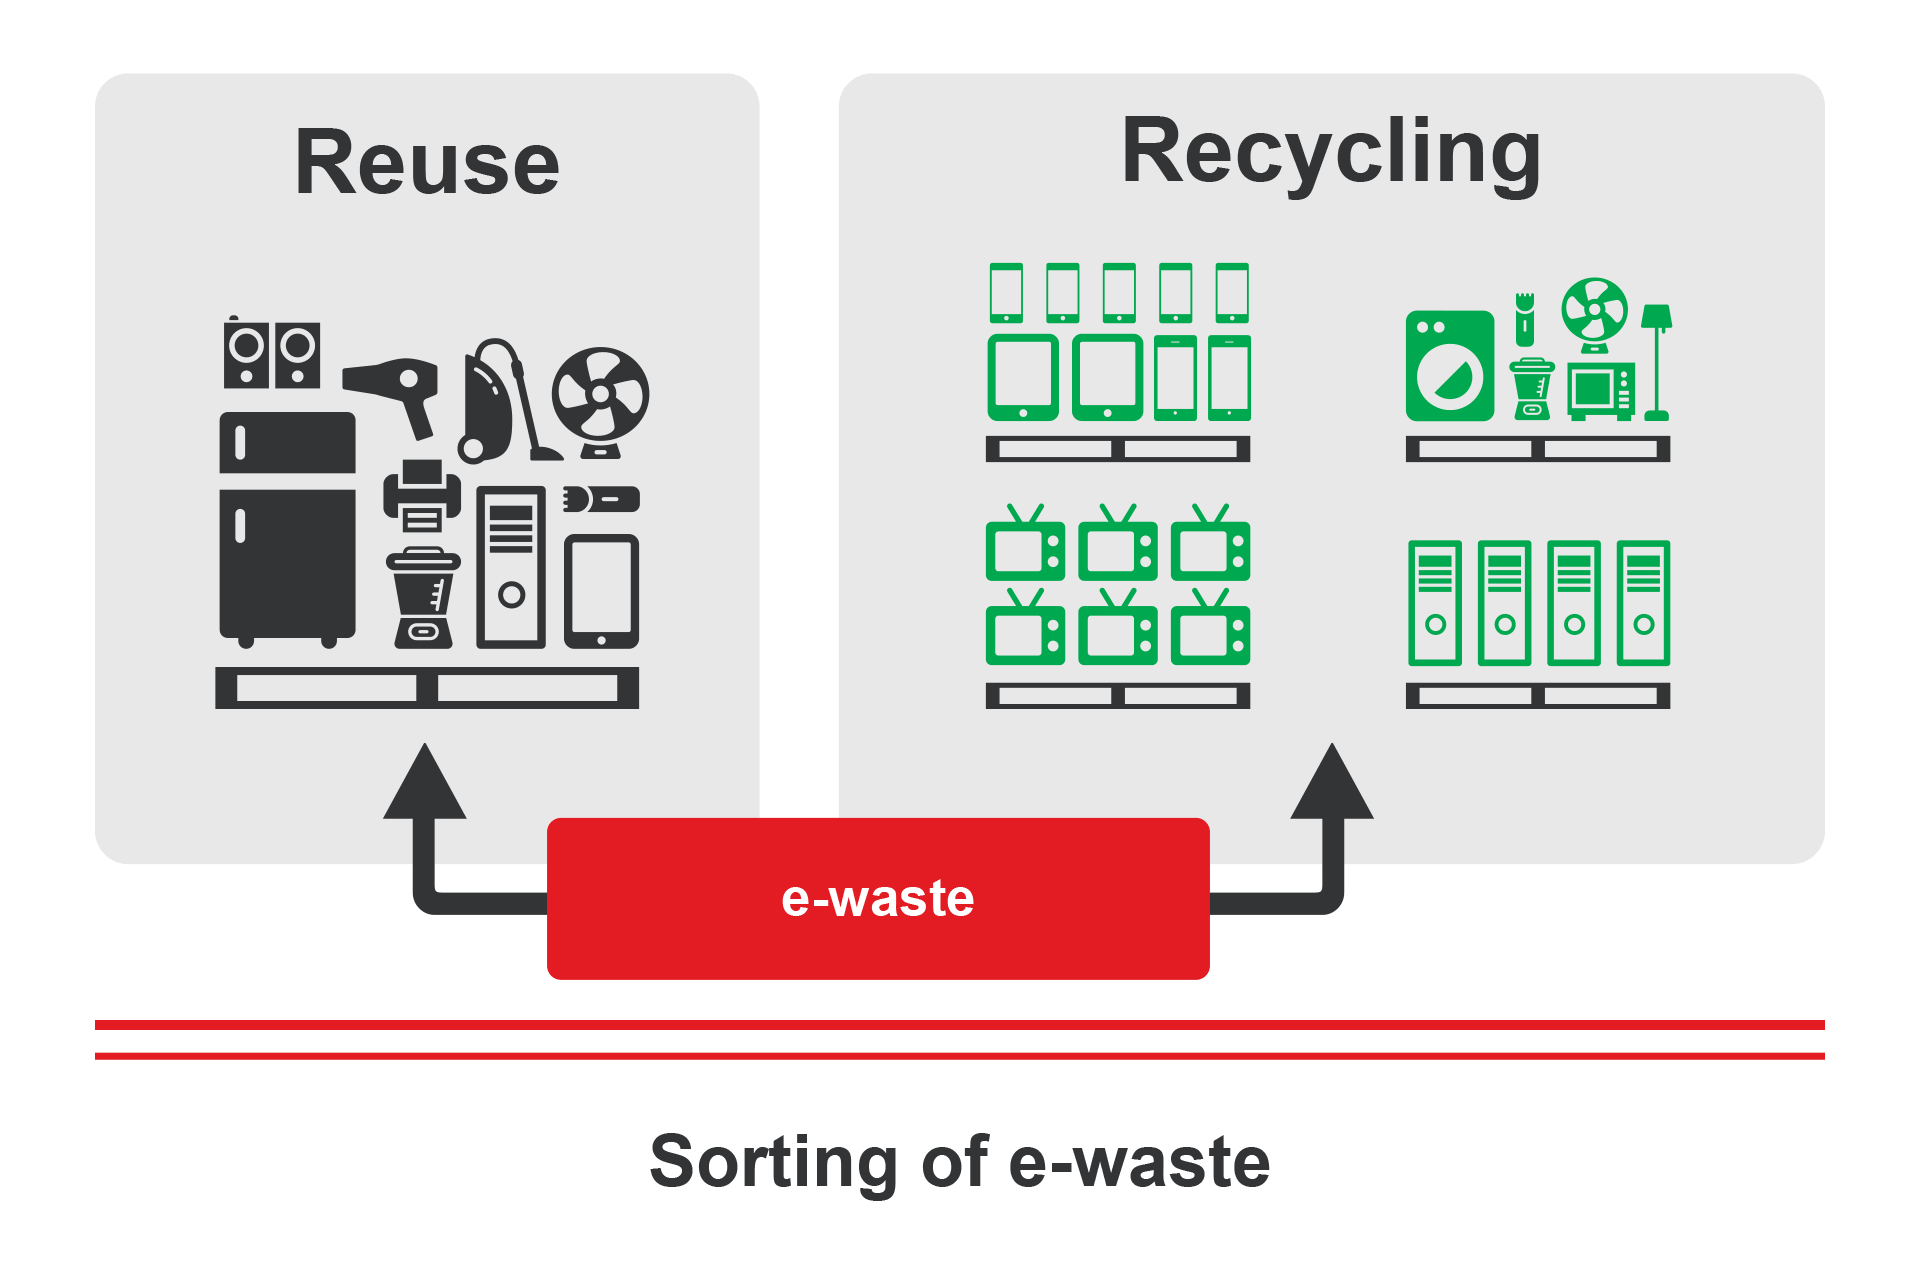 Sorting of e-waste